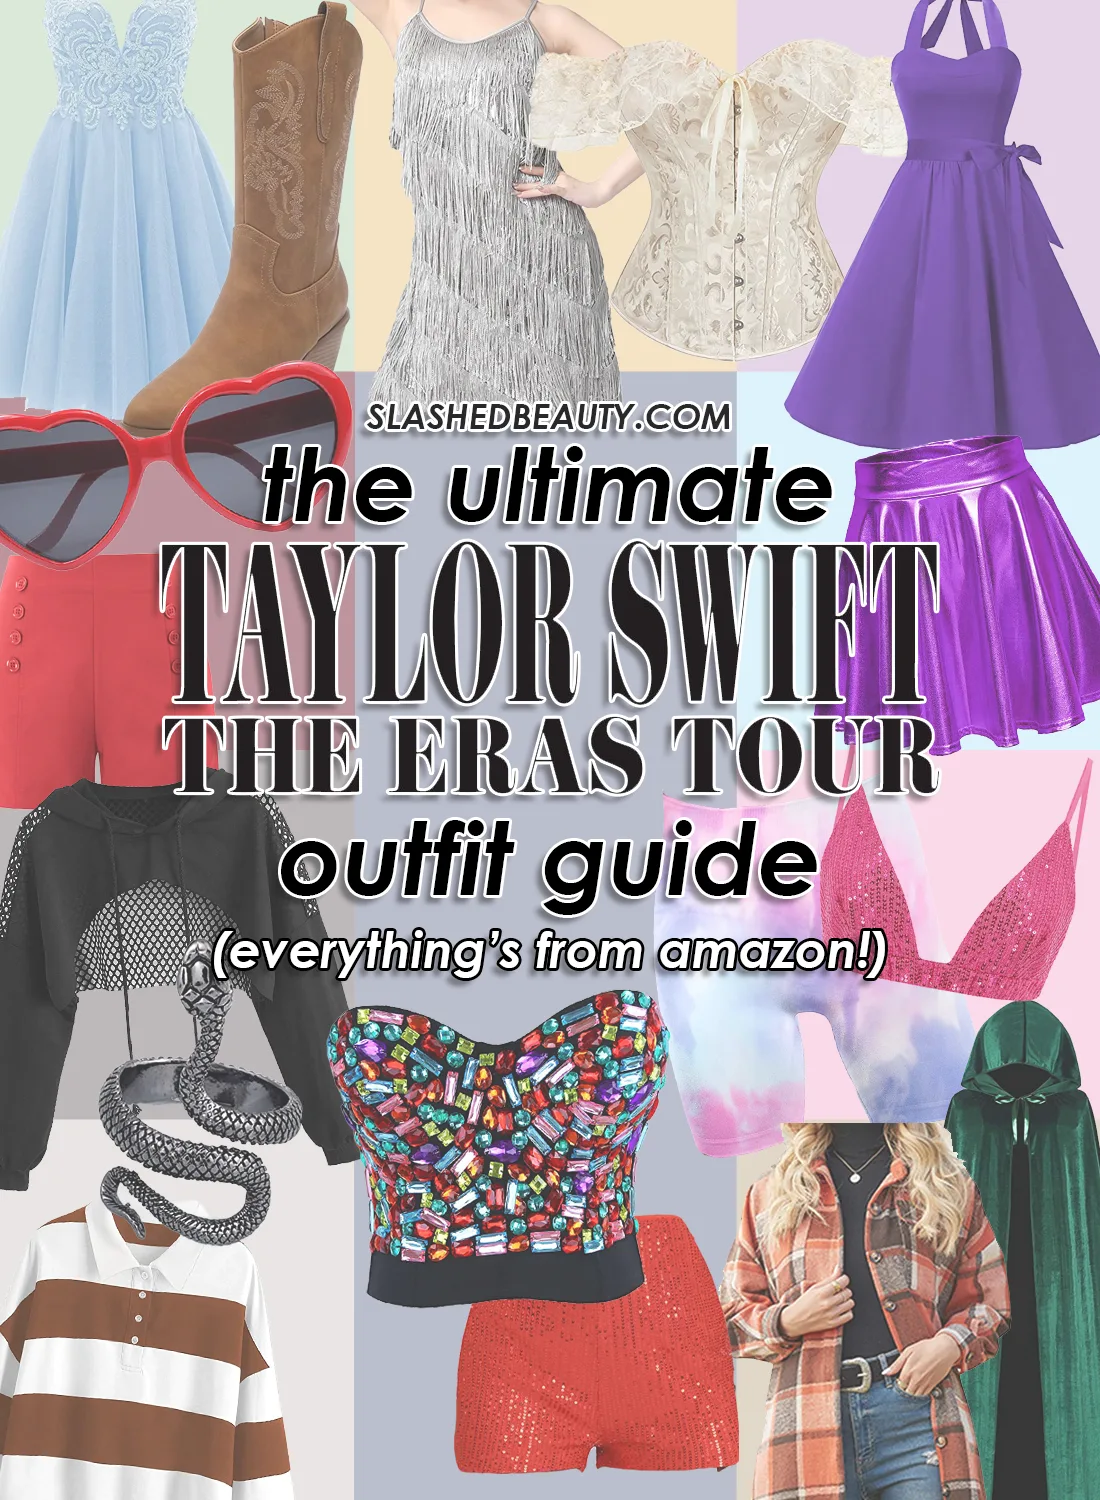 Collage of outfits with text: The Ultimate Taylor Swift The Eras Tour Outfit Guide (Everything's from Amazon!) | Slashed Beauty